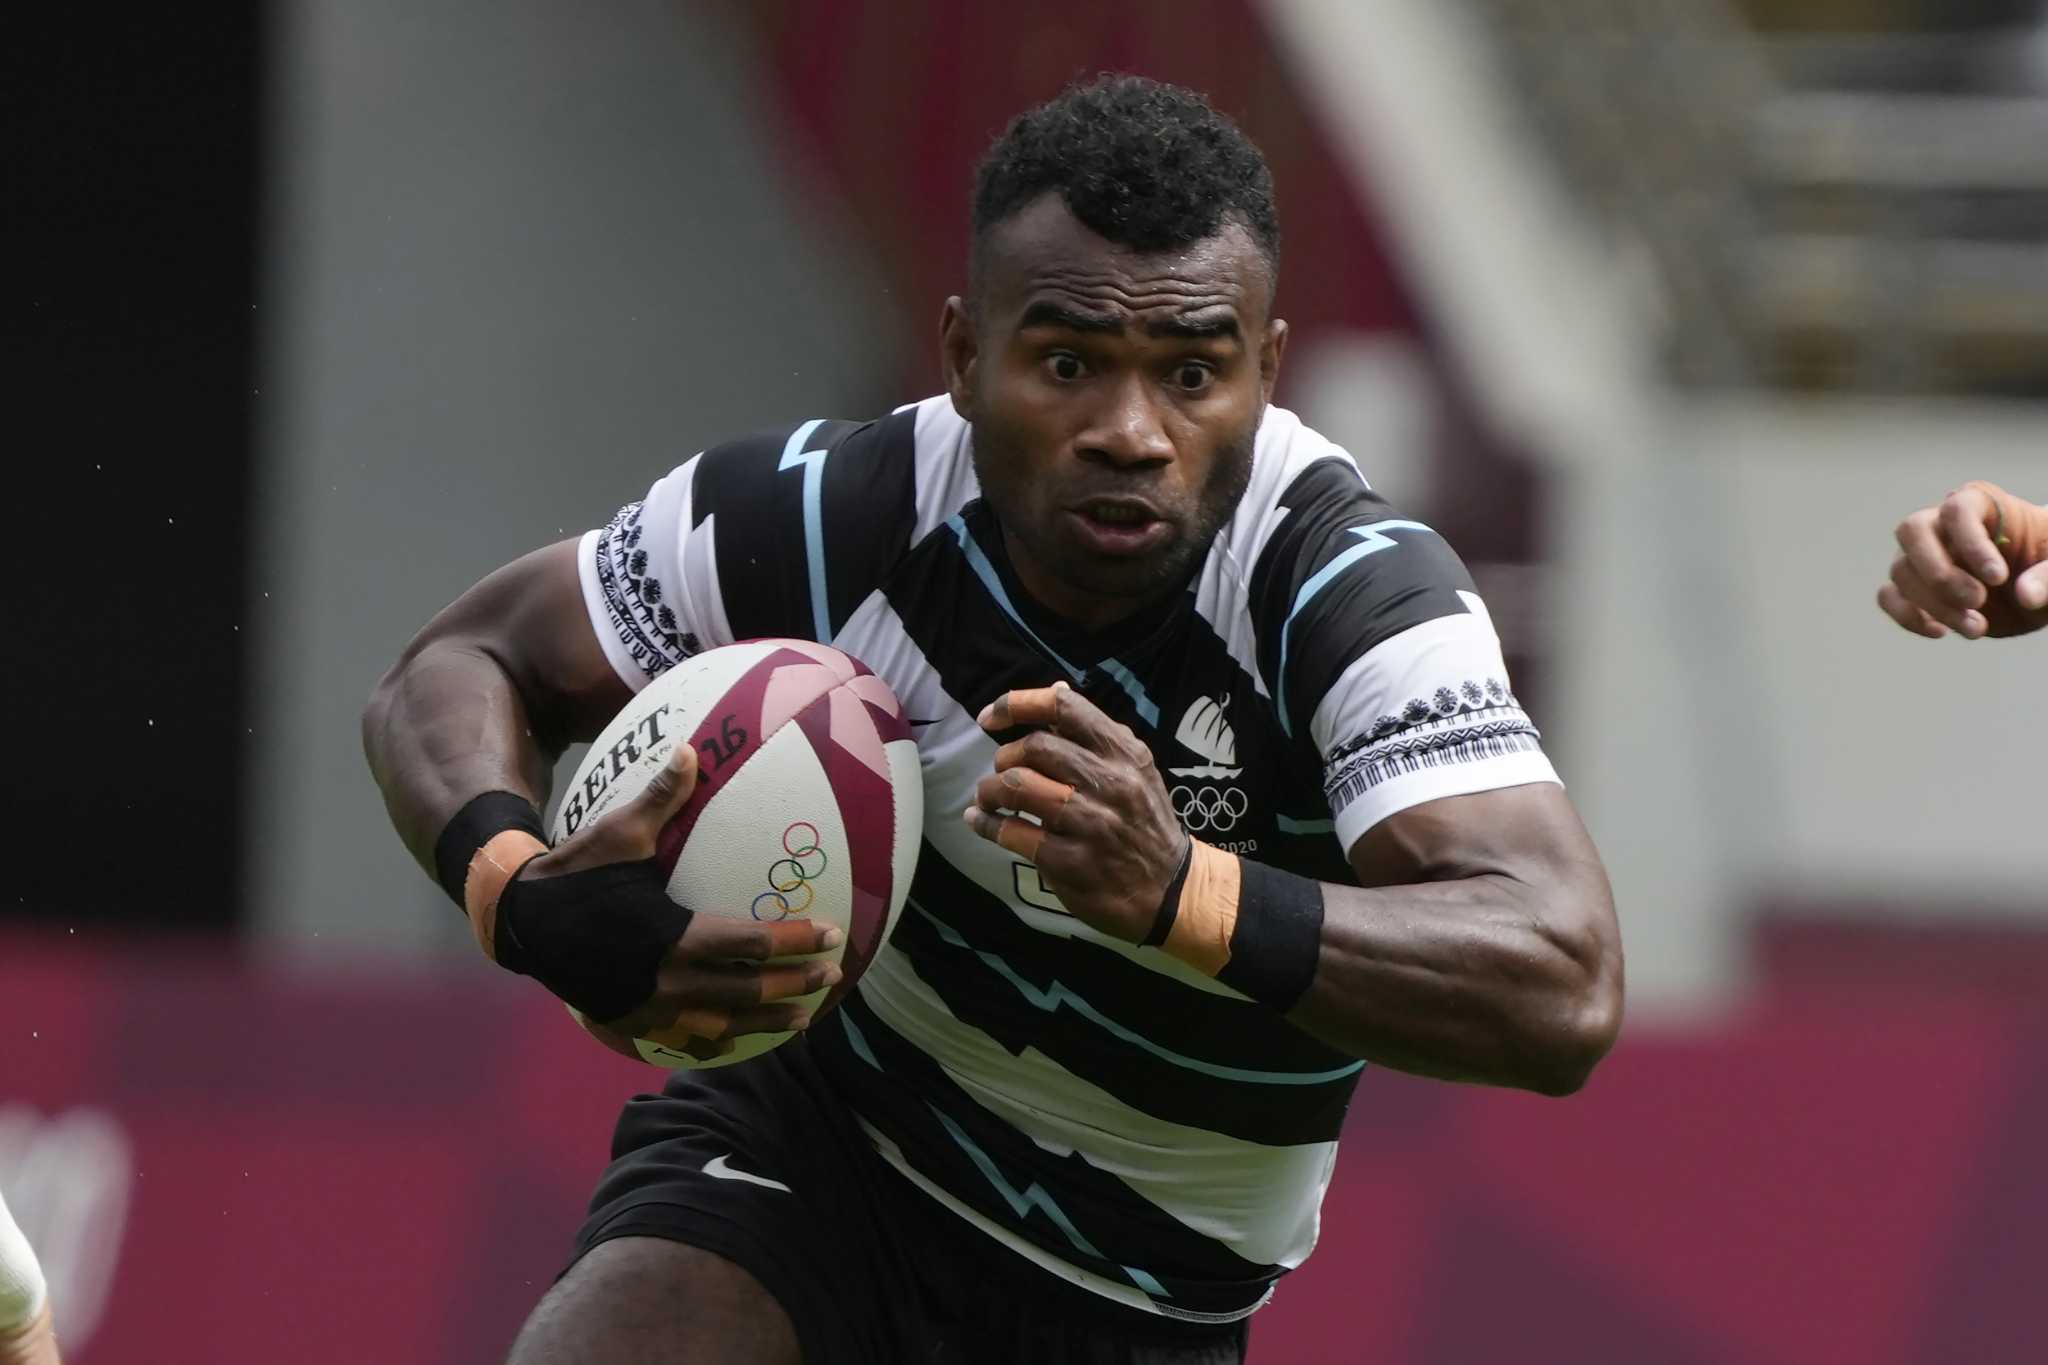 Tuwai back in Fiji's fold as the Olympic champions target a rugby sevens three-peat in Paris